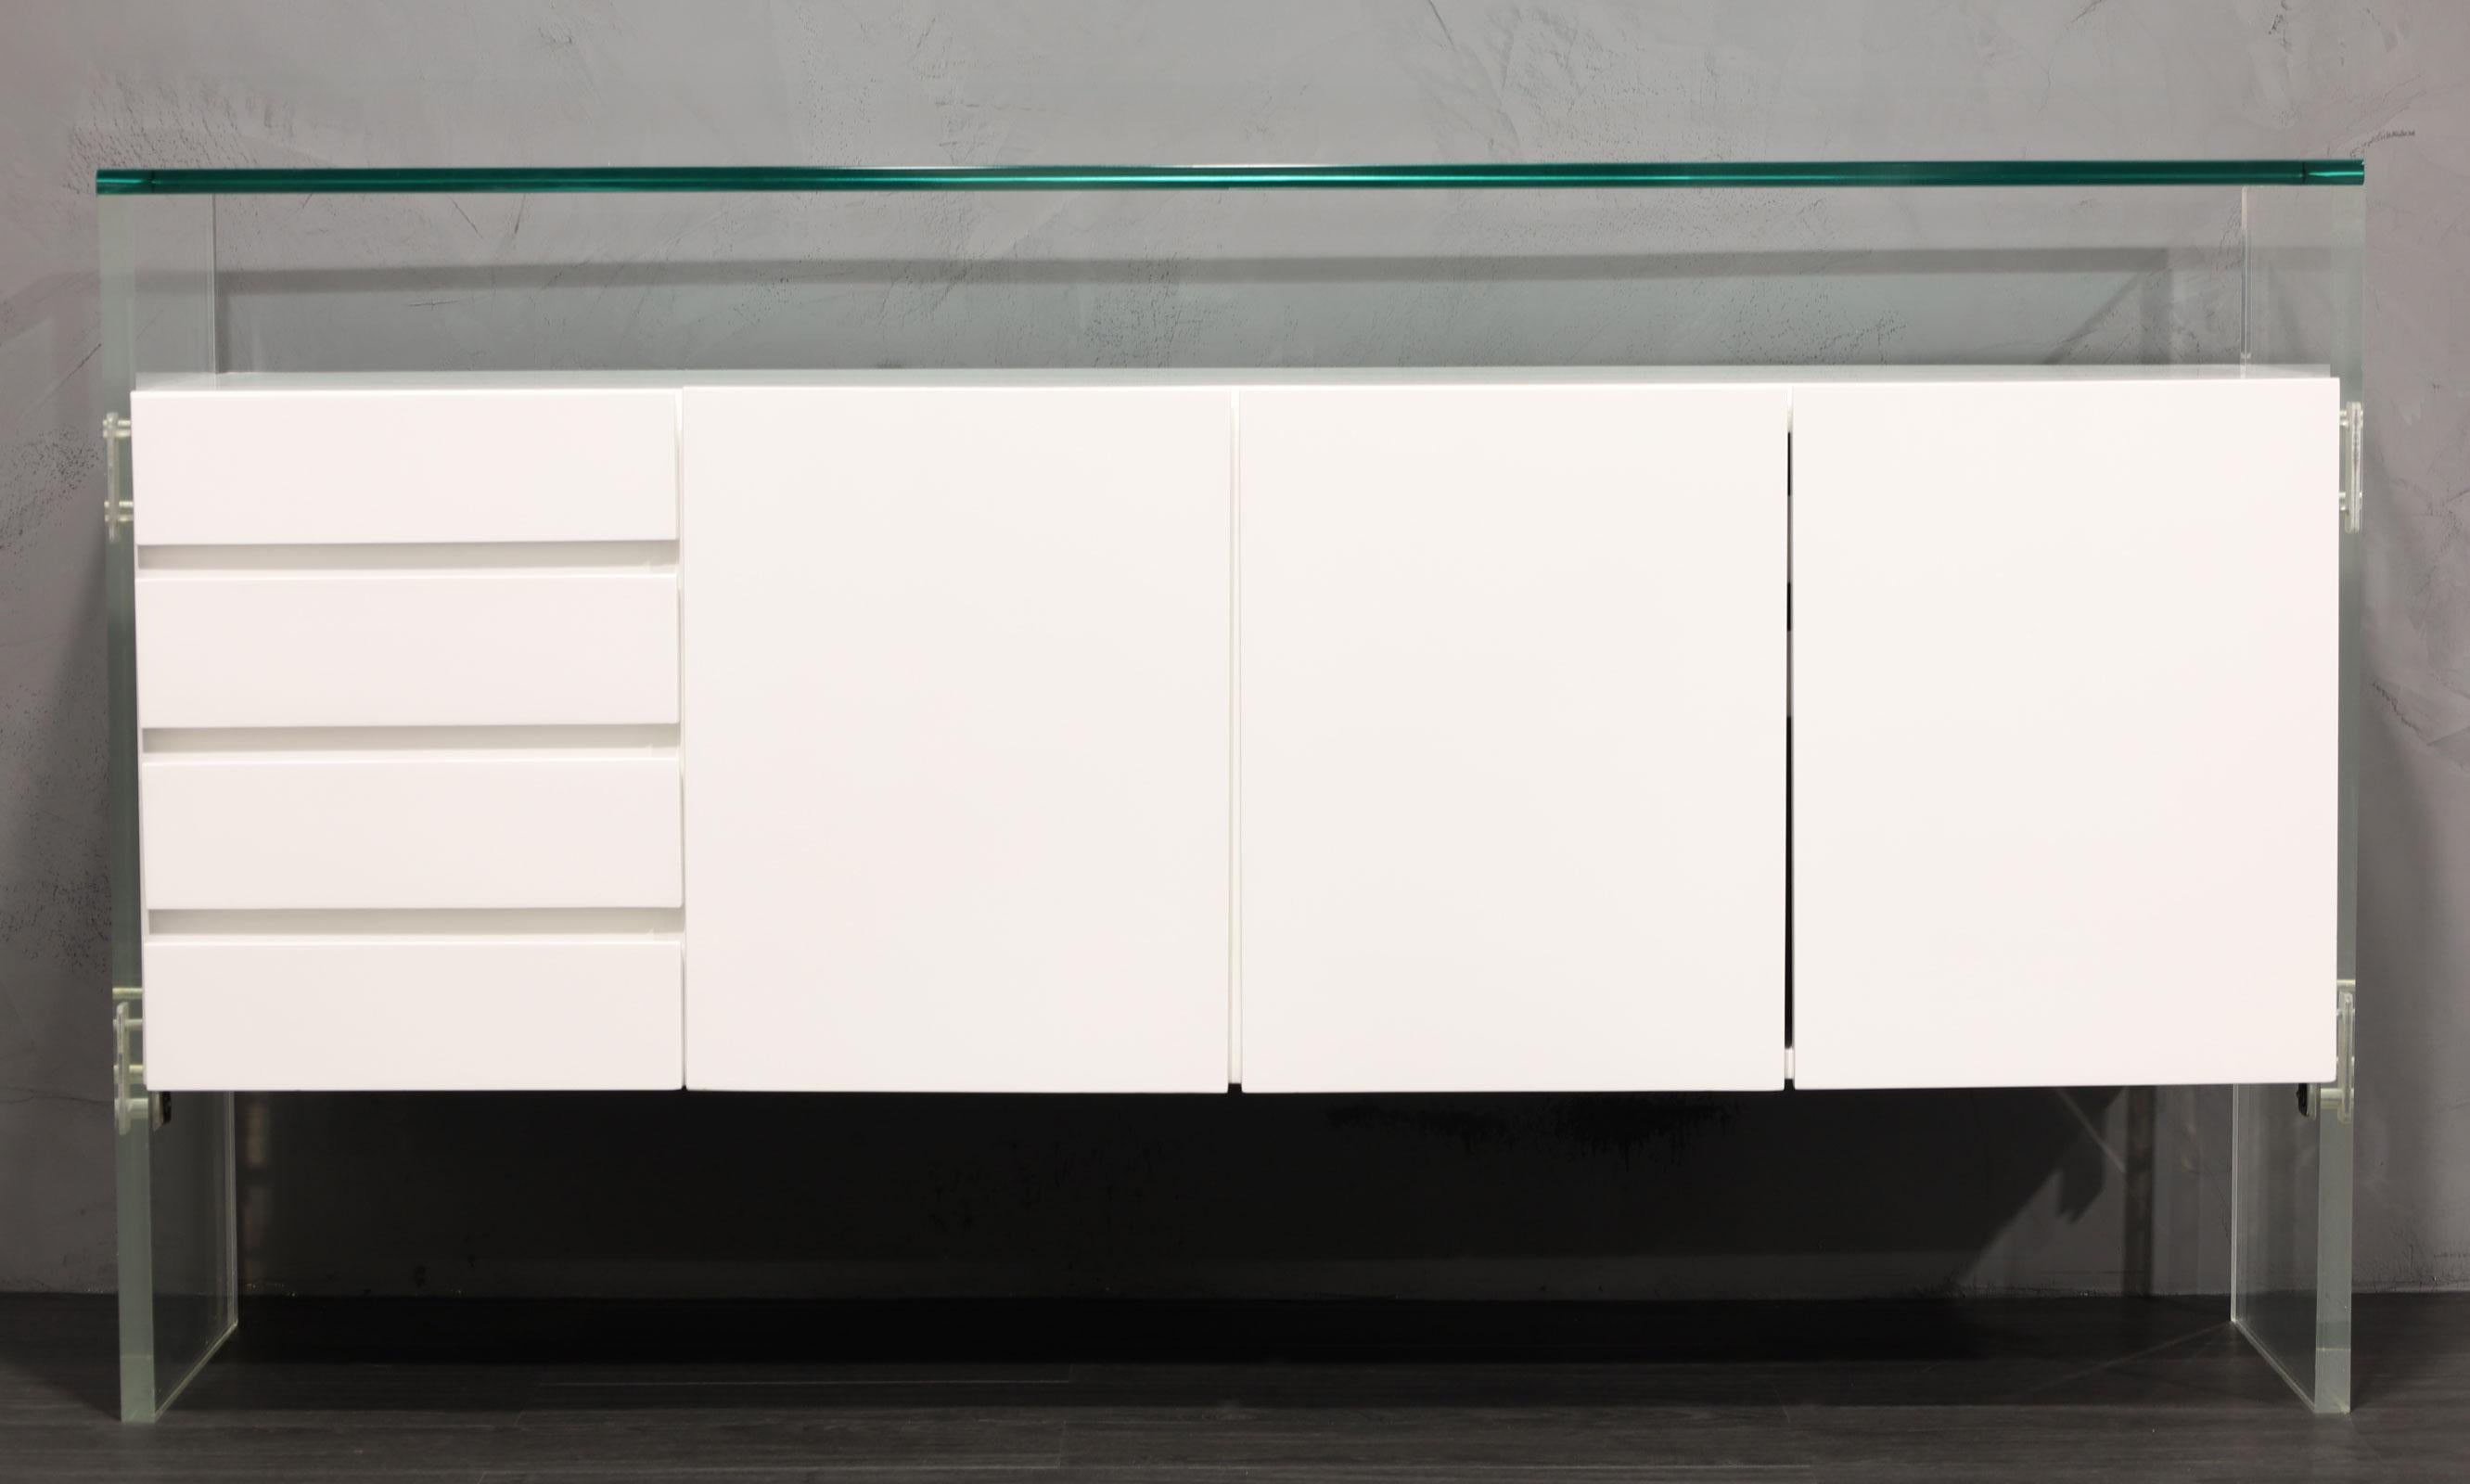 One of his iconic designs, a restored in white lacquer sideboard by Milo Baughman. Sideboard features a floating case piece that includes three doors with shelving and silverware storage. On the left side is four drawers. The thick Lucite legs